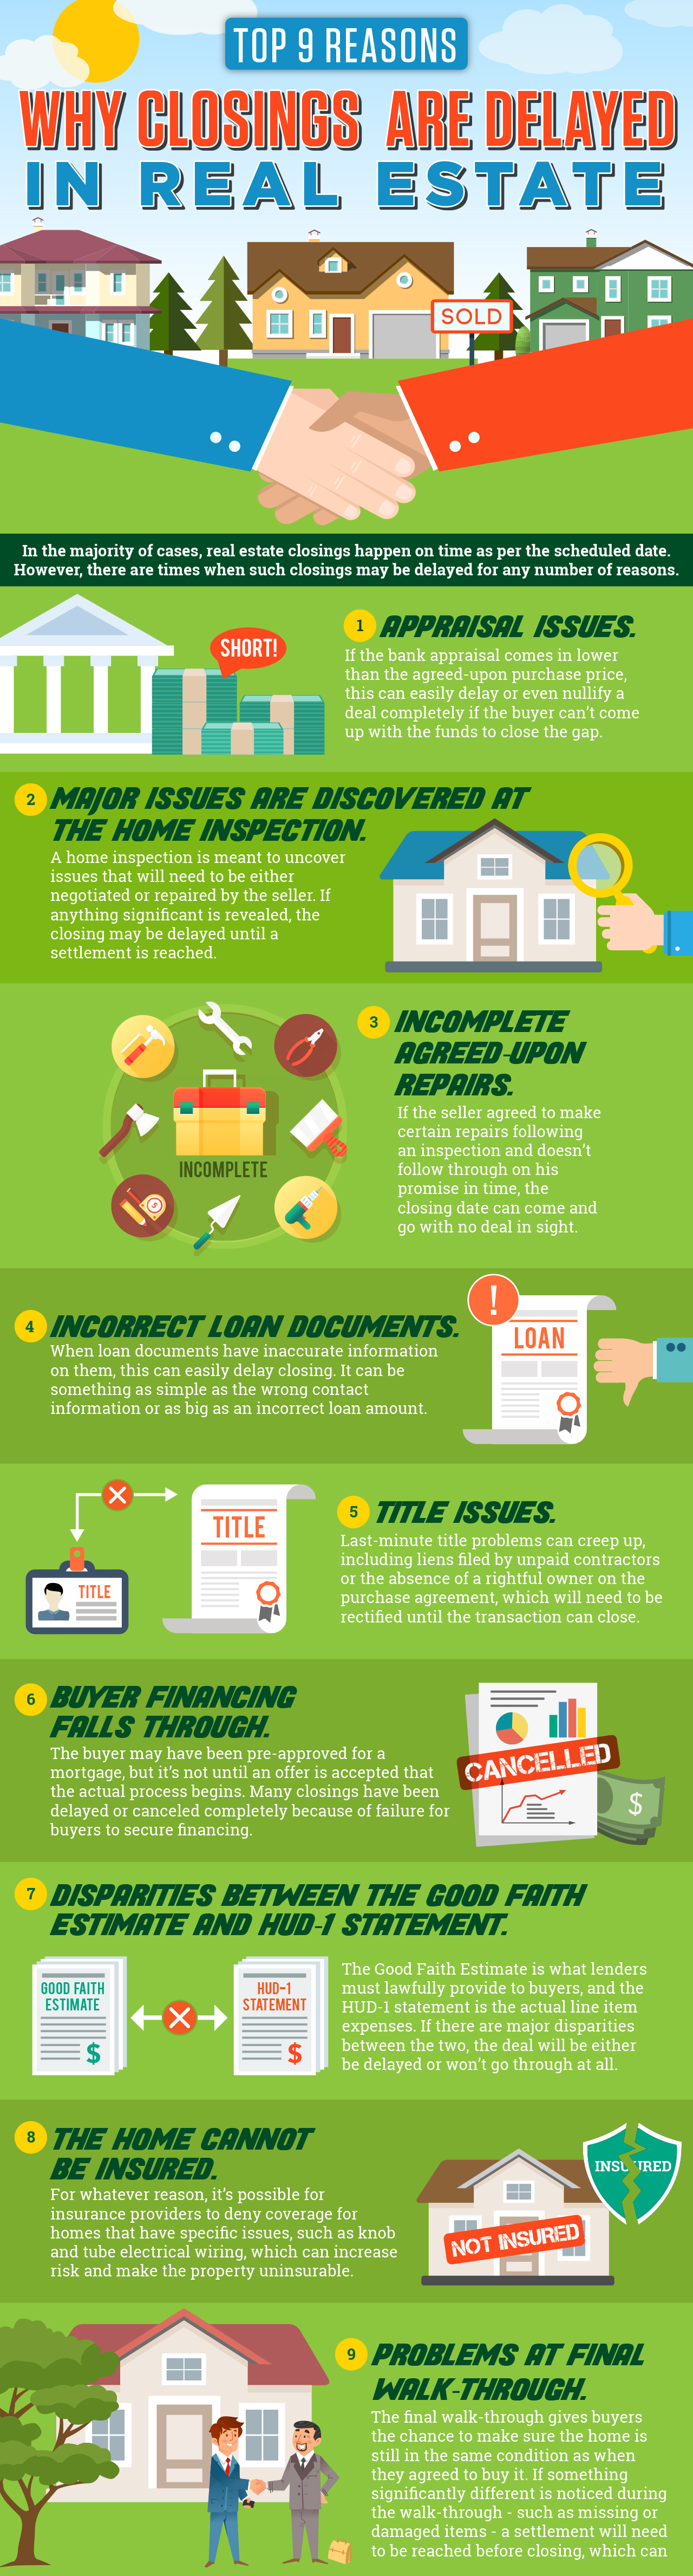 top-9-reasons-why-closings-are-delayed-in-real-estate-infographic